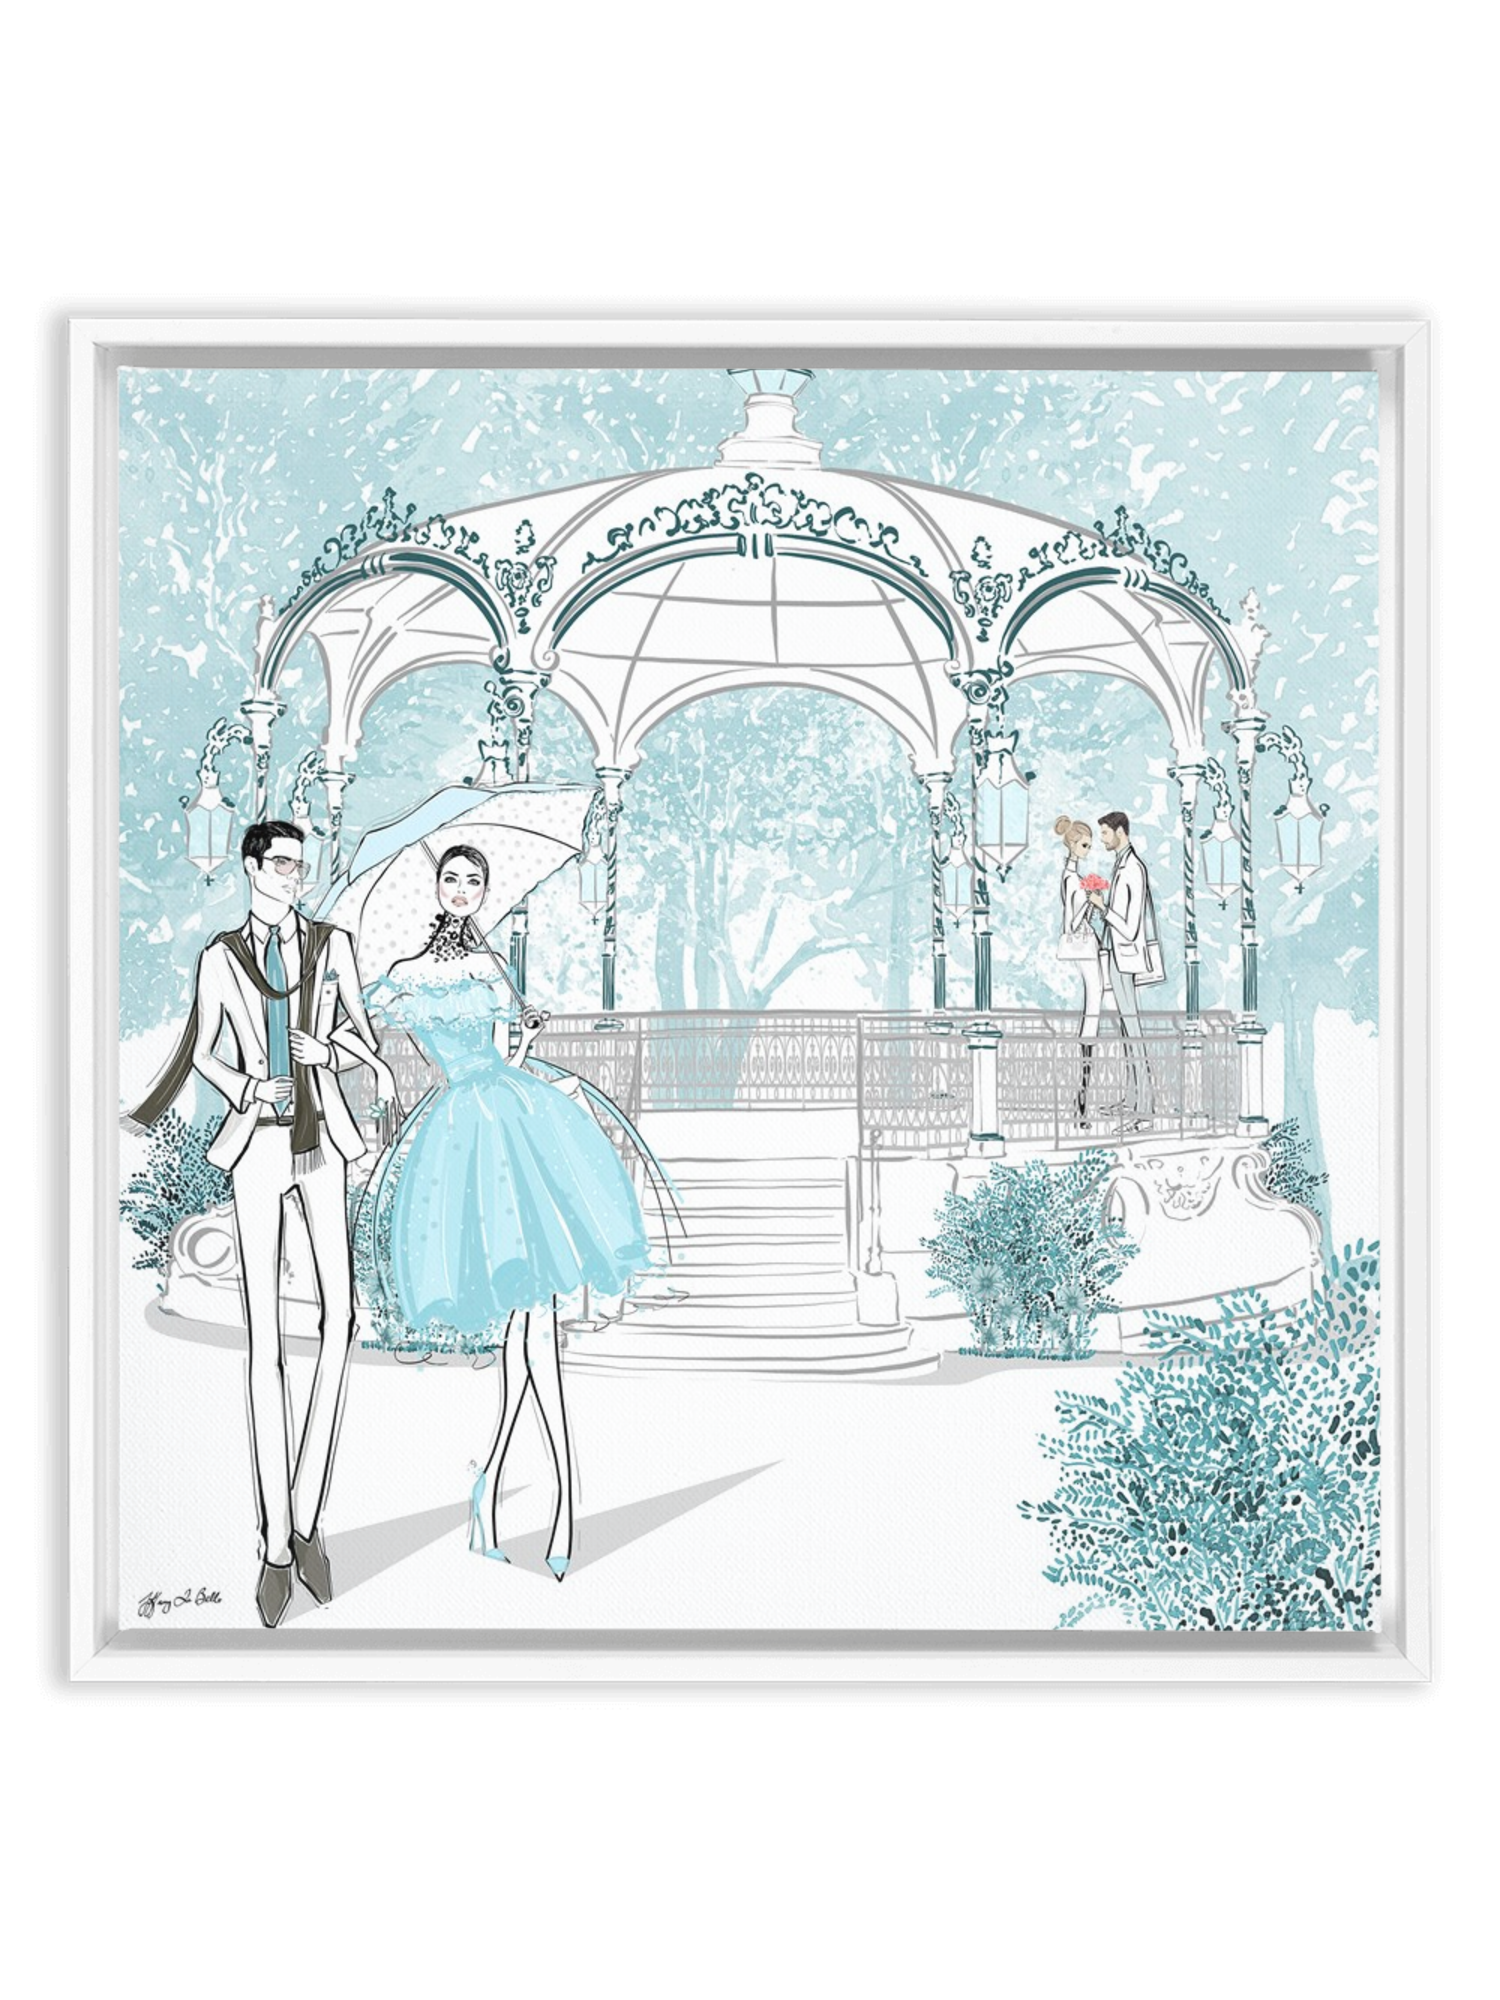 Young Lovers - Illustration - Canvas Gallery Print - Unframed or Frame – Tiffany  La Belle